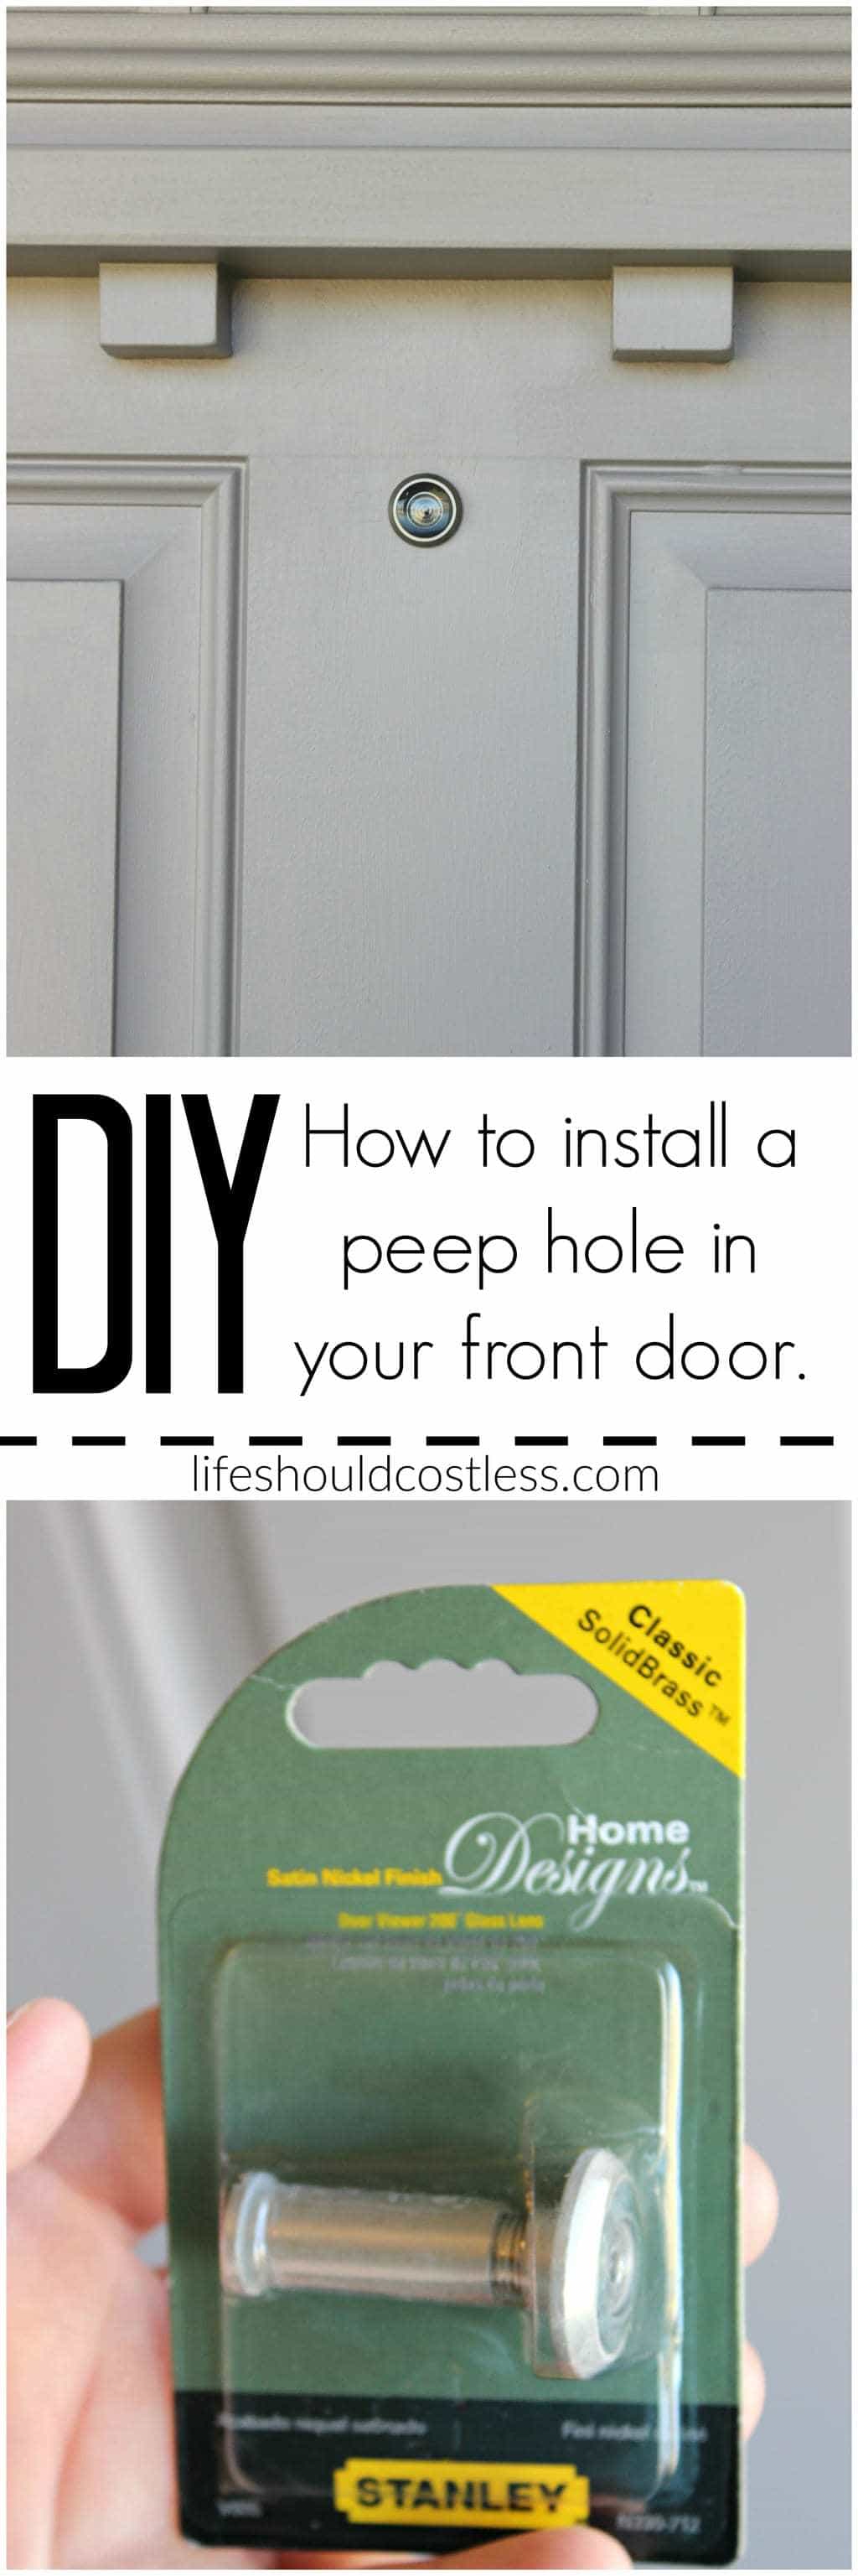 DIY How to install a peep hole in your front door. It's so easy and inexpensive! It takes less than five minutes and costs less than ten bucks. See this popular DIY pin and many others at lifeshouldcostless.com.